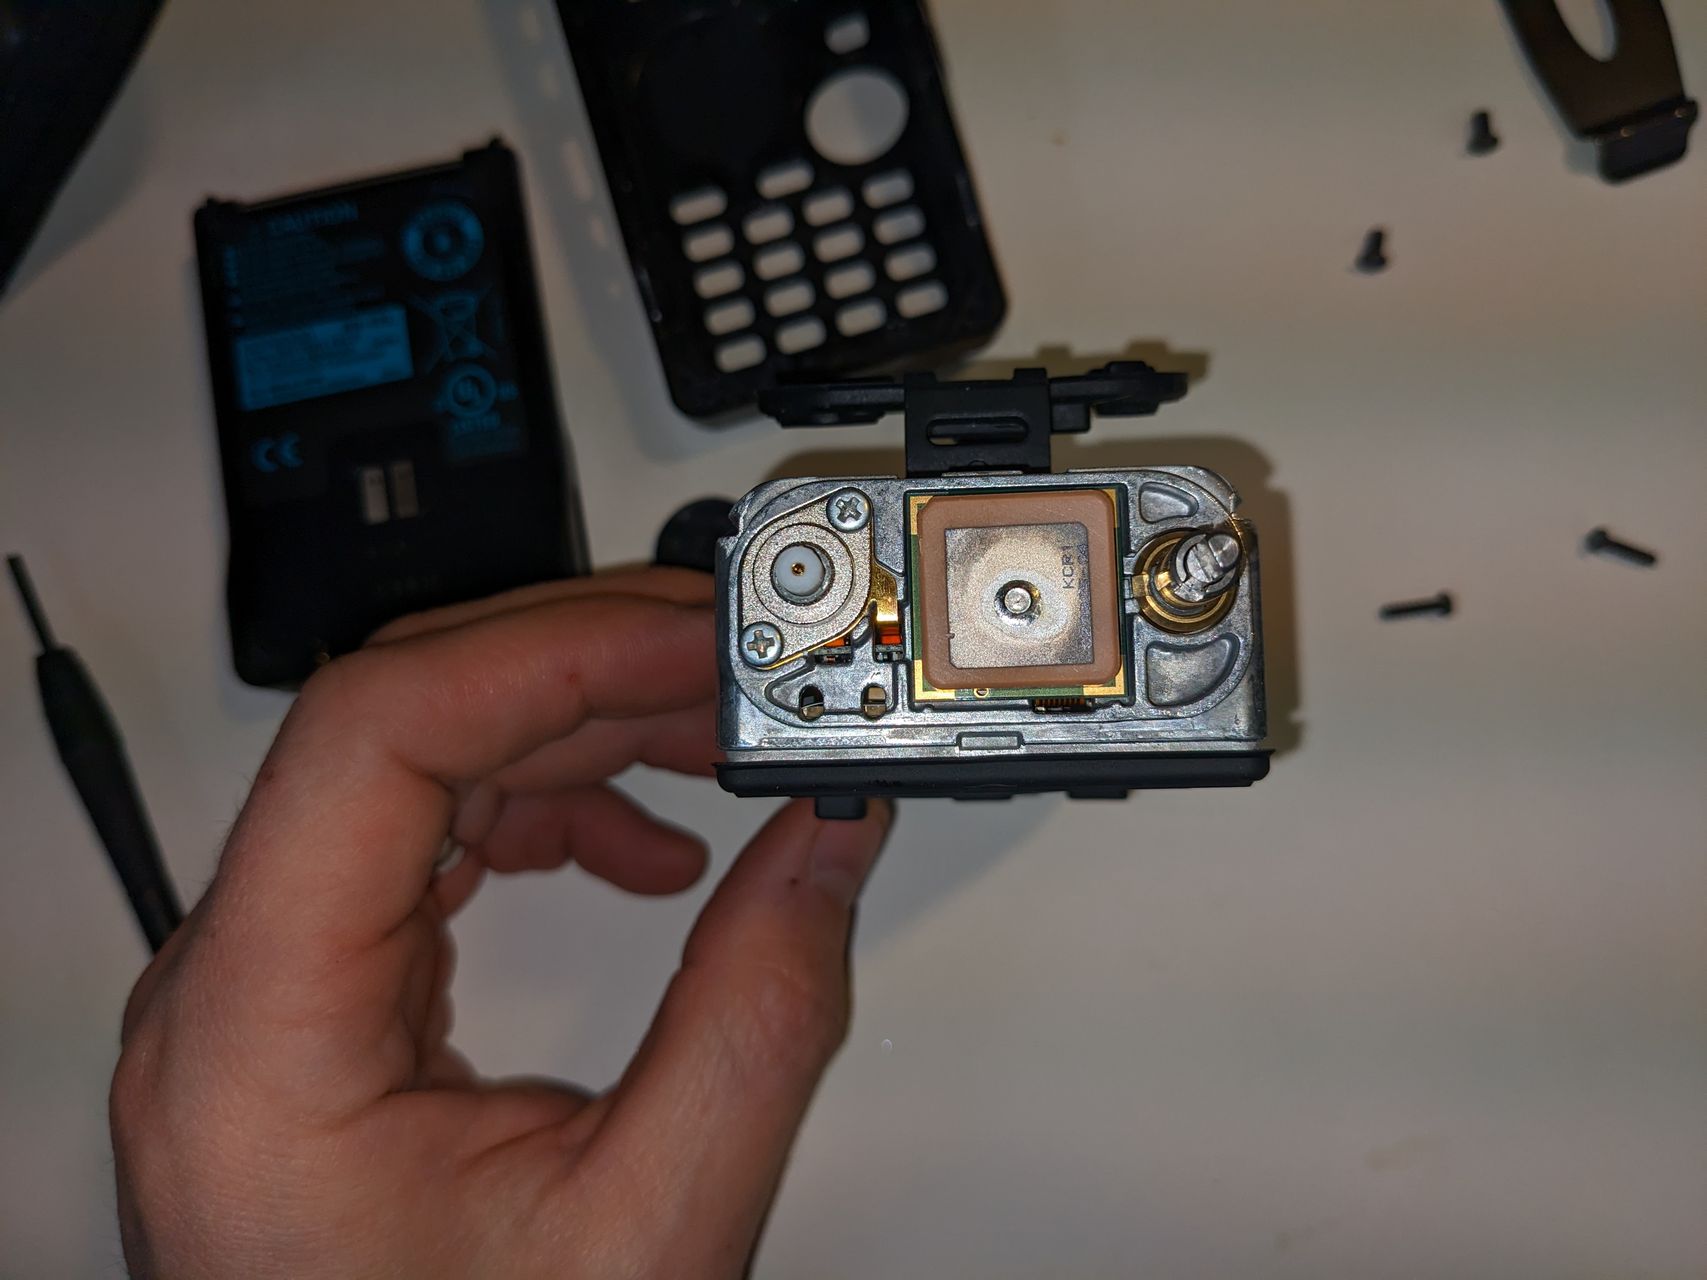 showing the components on the top of the radio.